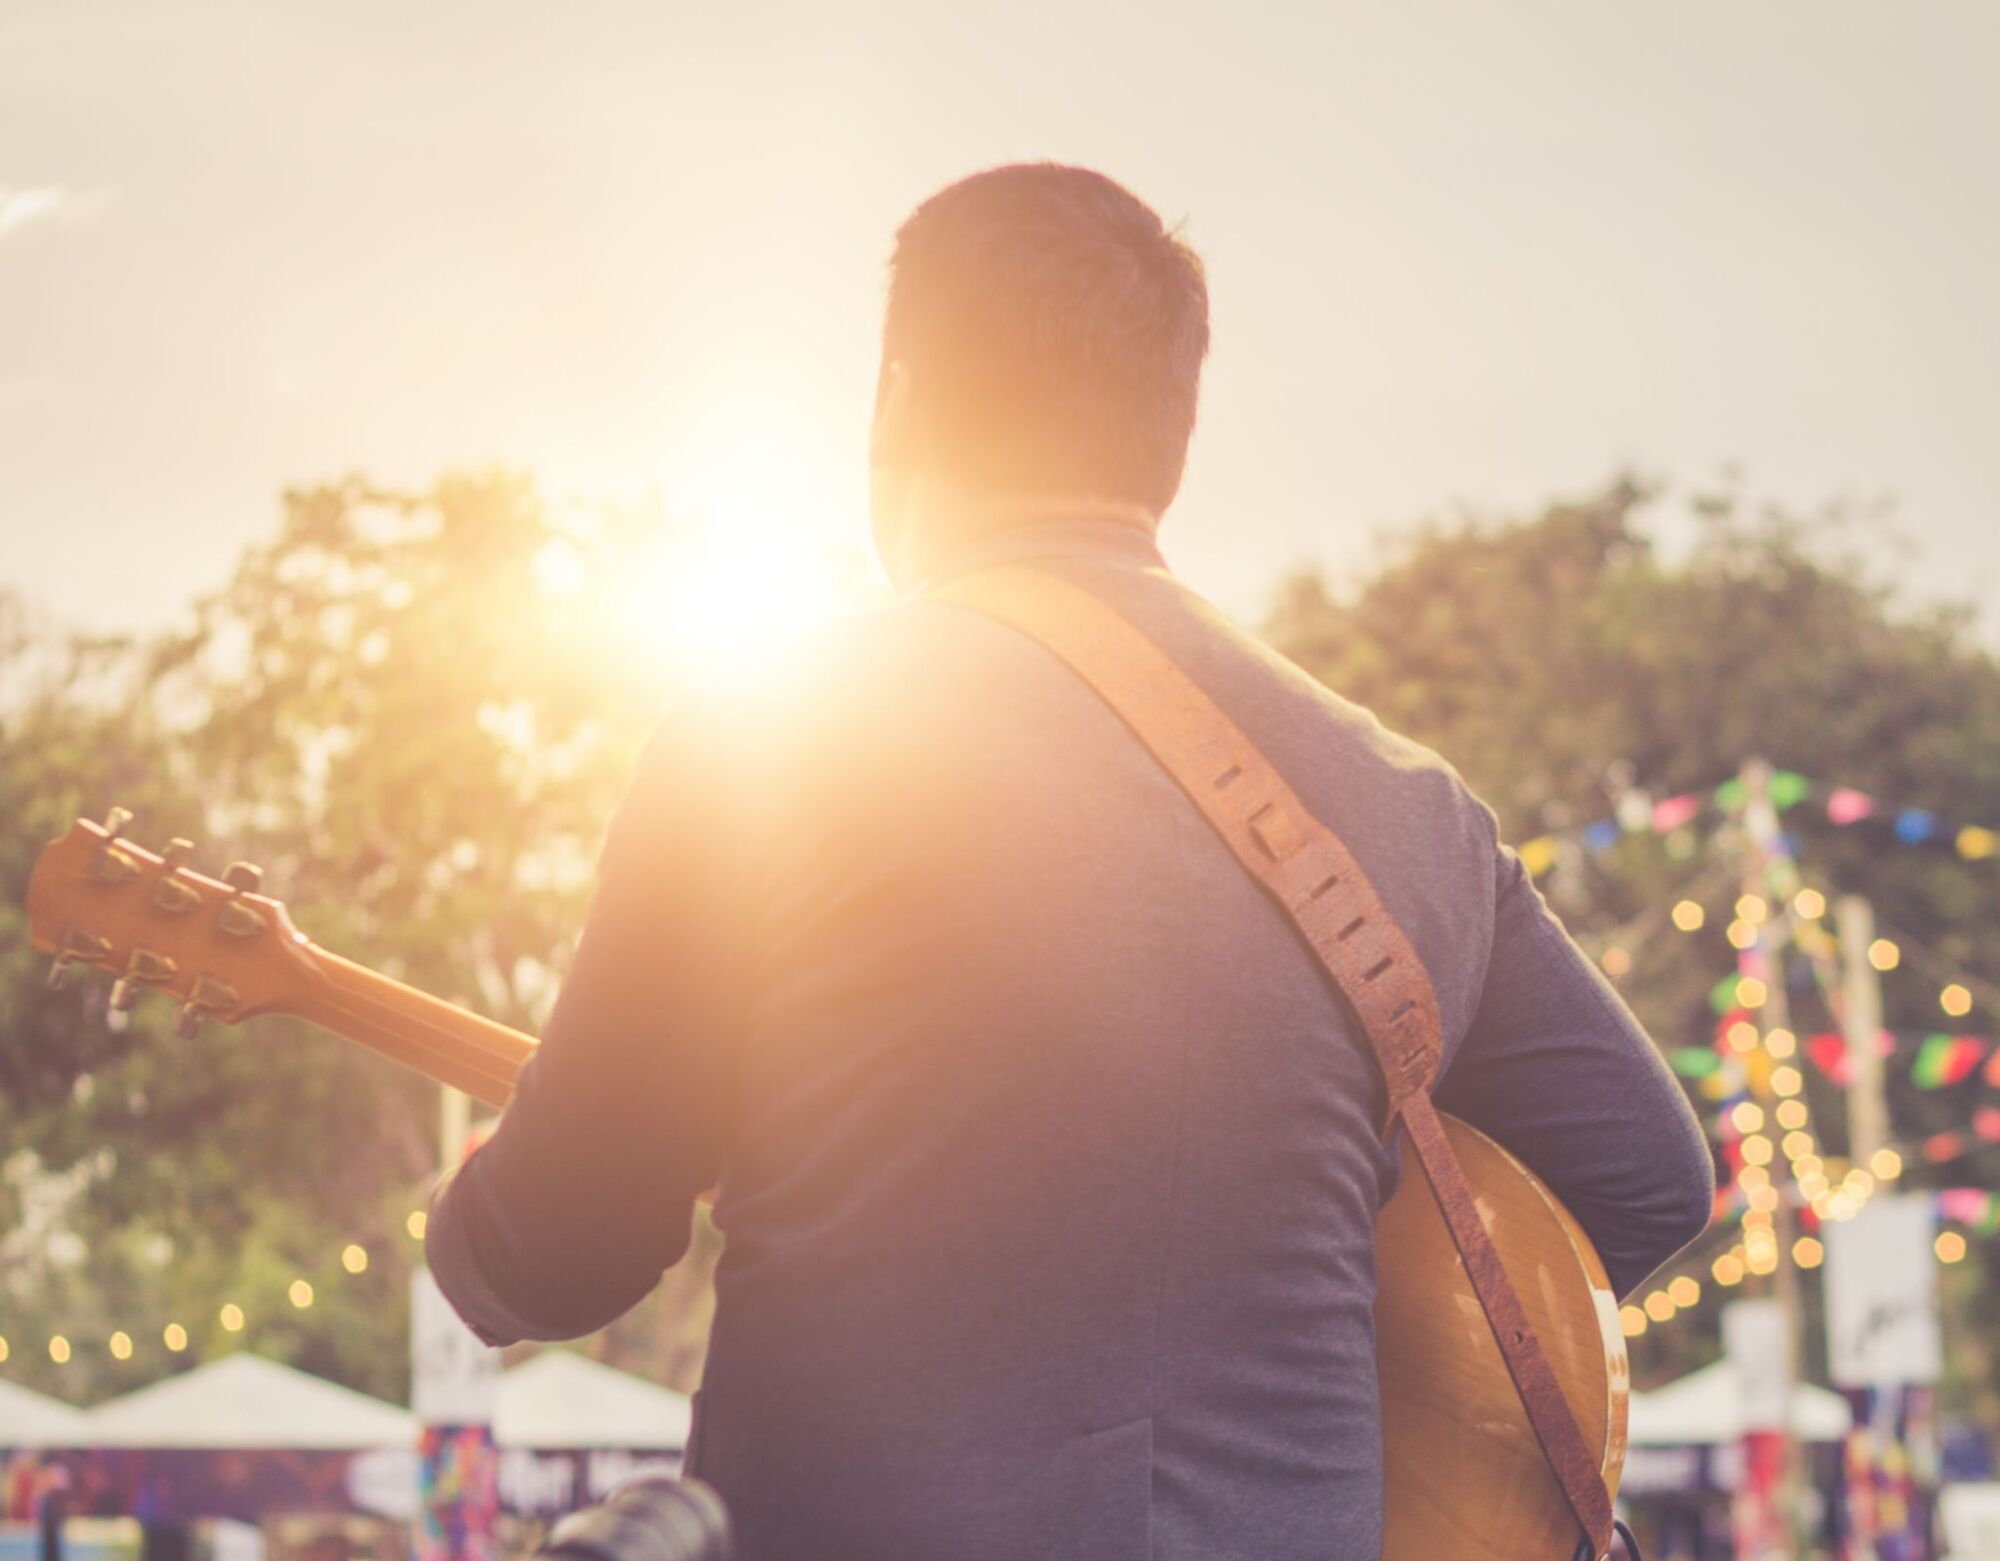 A man playing an acoustic guitar at a festival at sunset.